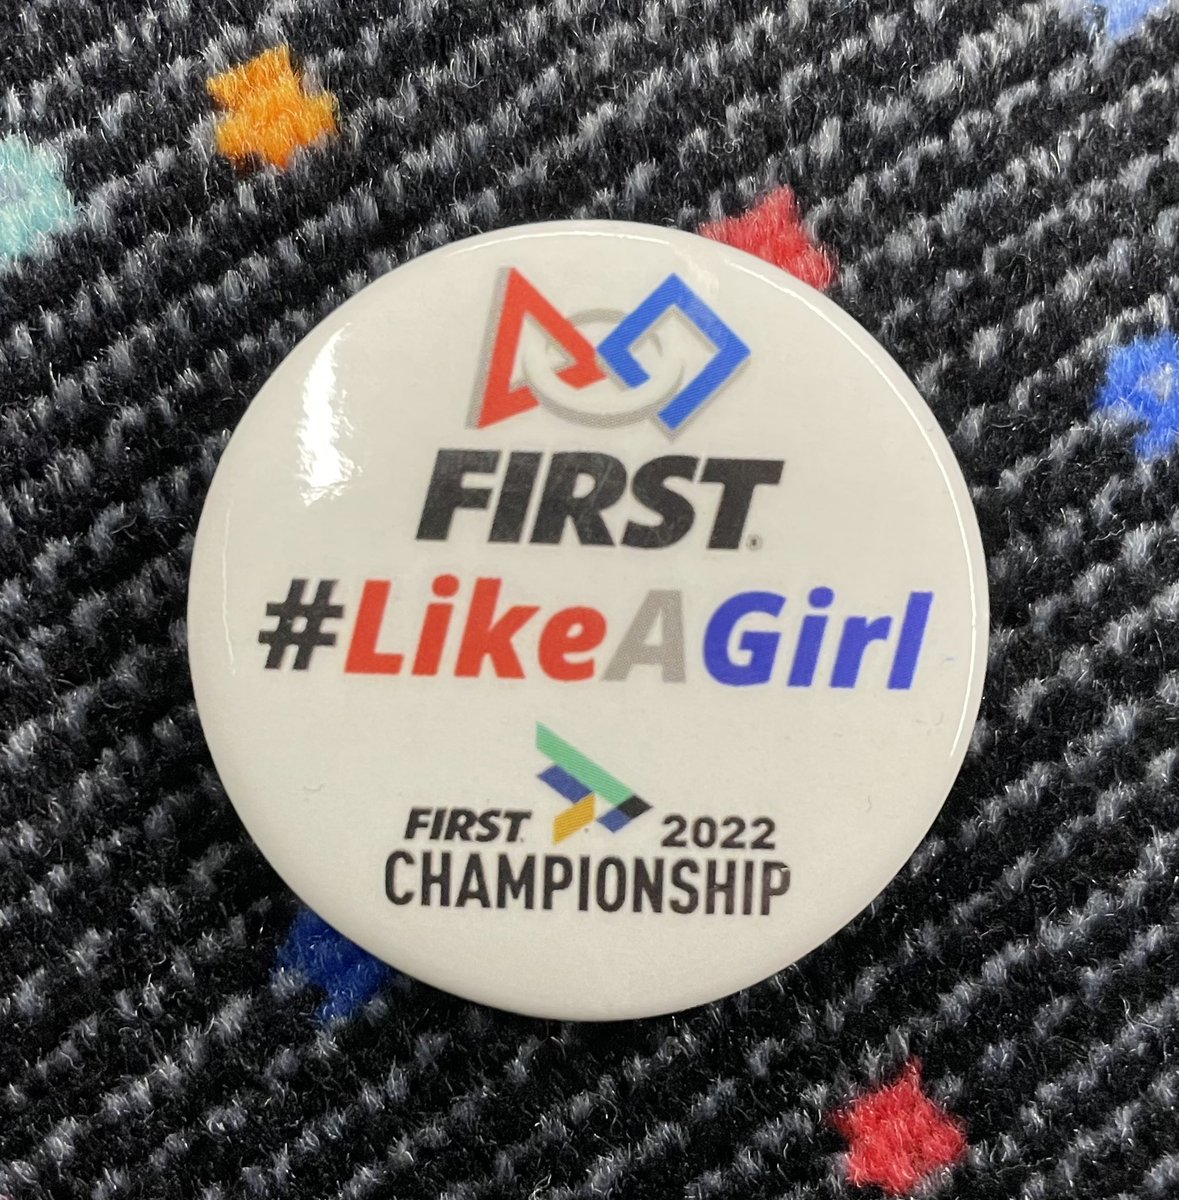 Our epic @firstlikeagirl championship buttons were sure a hit at FIRST Championship. Did you get one? Let us know and share where they ended up. #FIRSTChamps @FIRSTweets @FTCTeams #FIRSTLikeAGirl